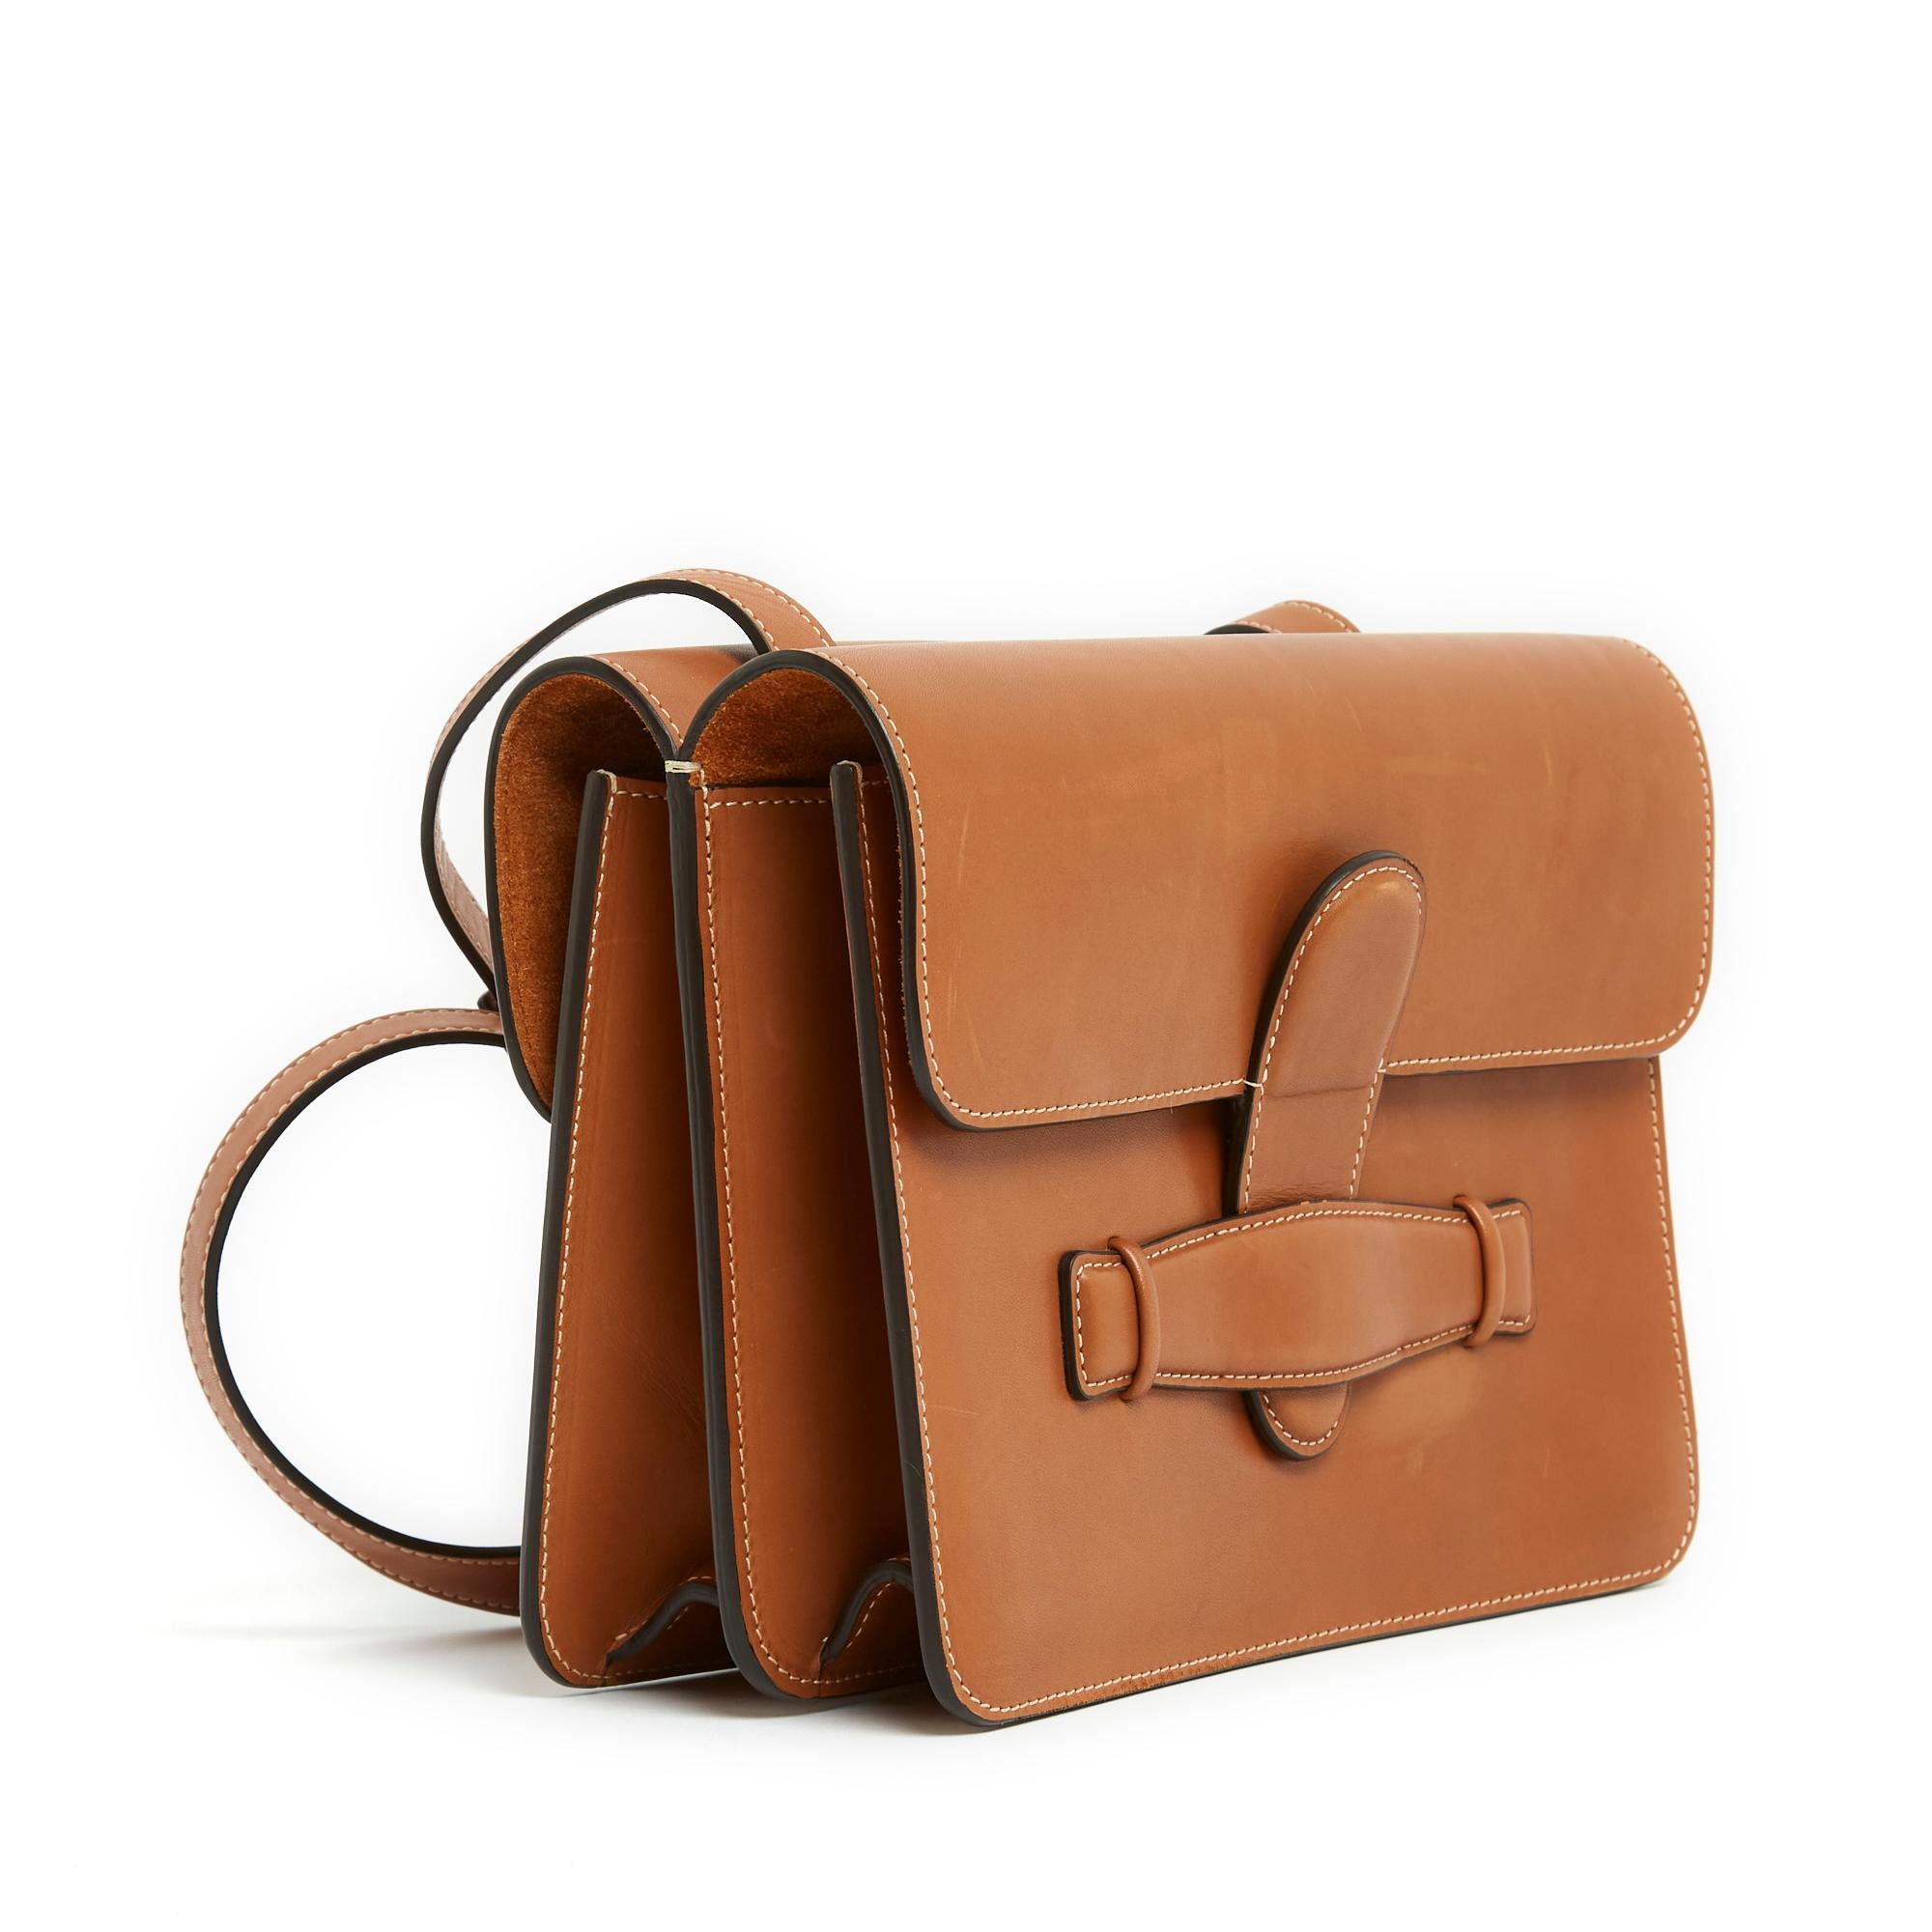 Céline bag by Phoebe Philo Symmetrical model in smooth natural or gold or camel colour leather, 1 compartment on each side, lined with matching suede and closed by its flap (with zipped pocket), identical on the other (with double patch pocket),